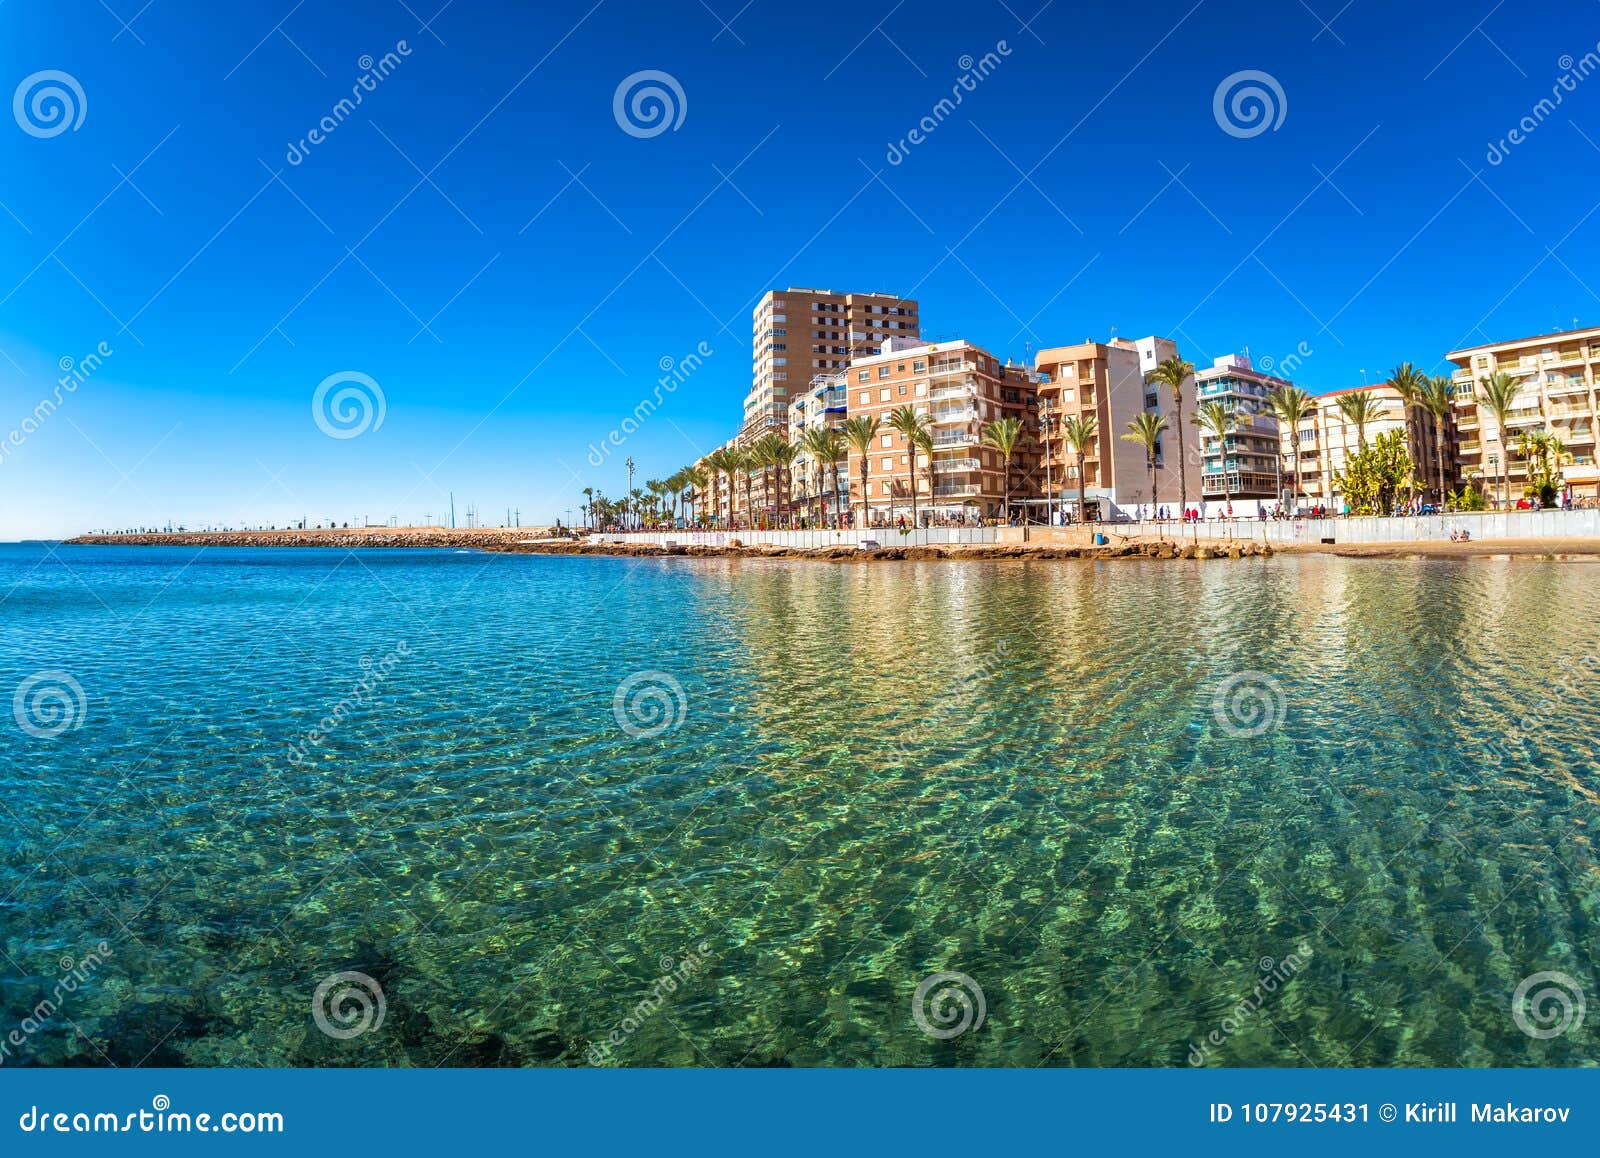 beach and cityscape. torrevieja, spain